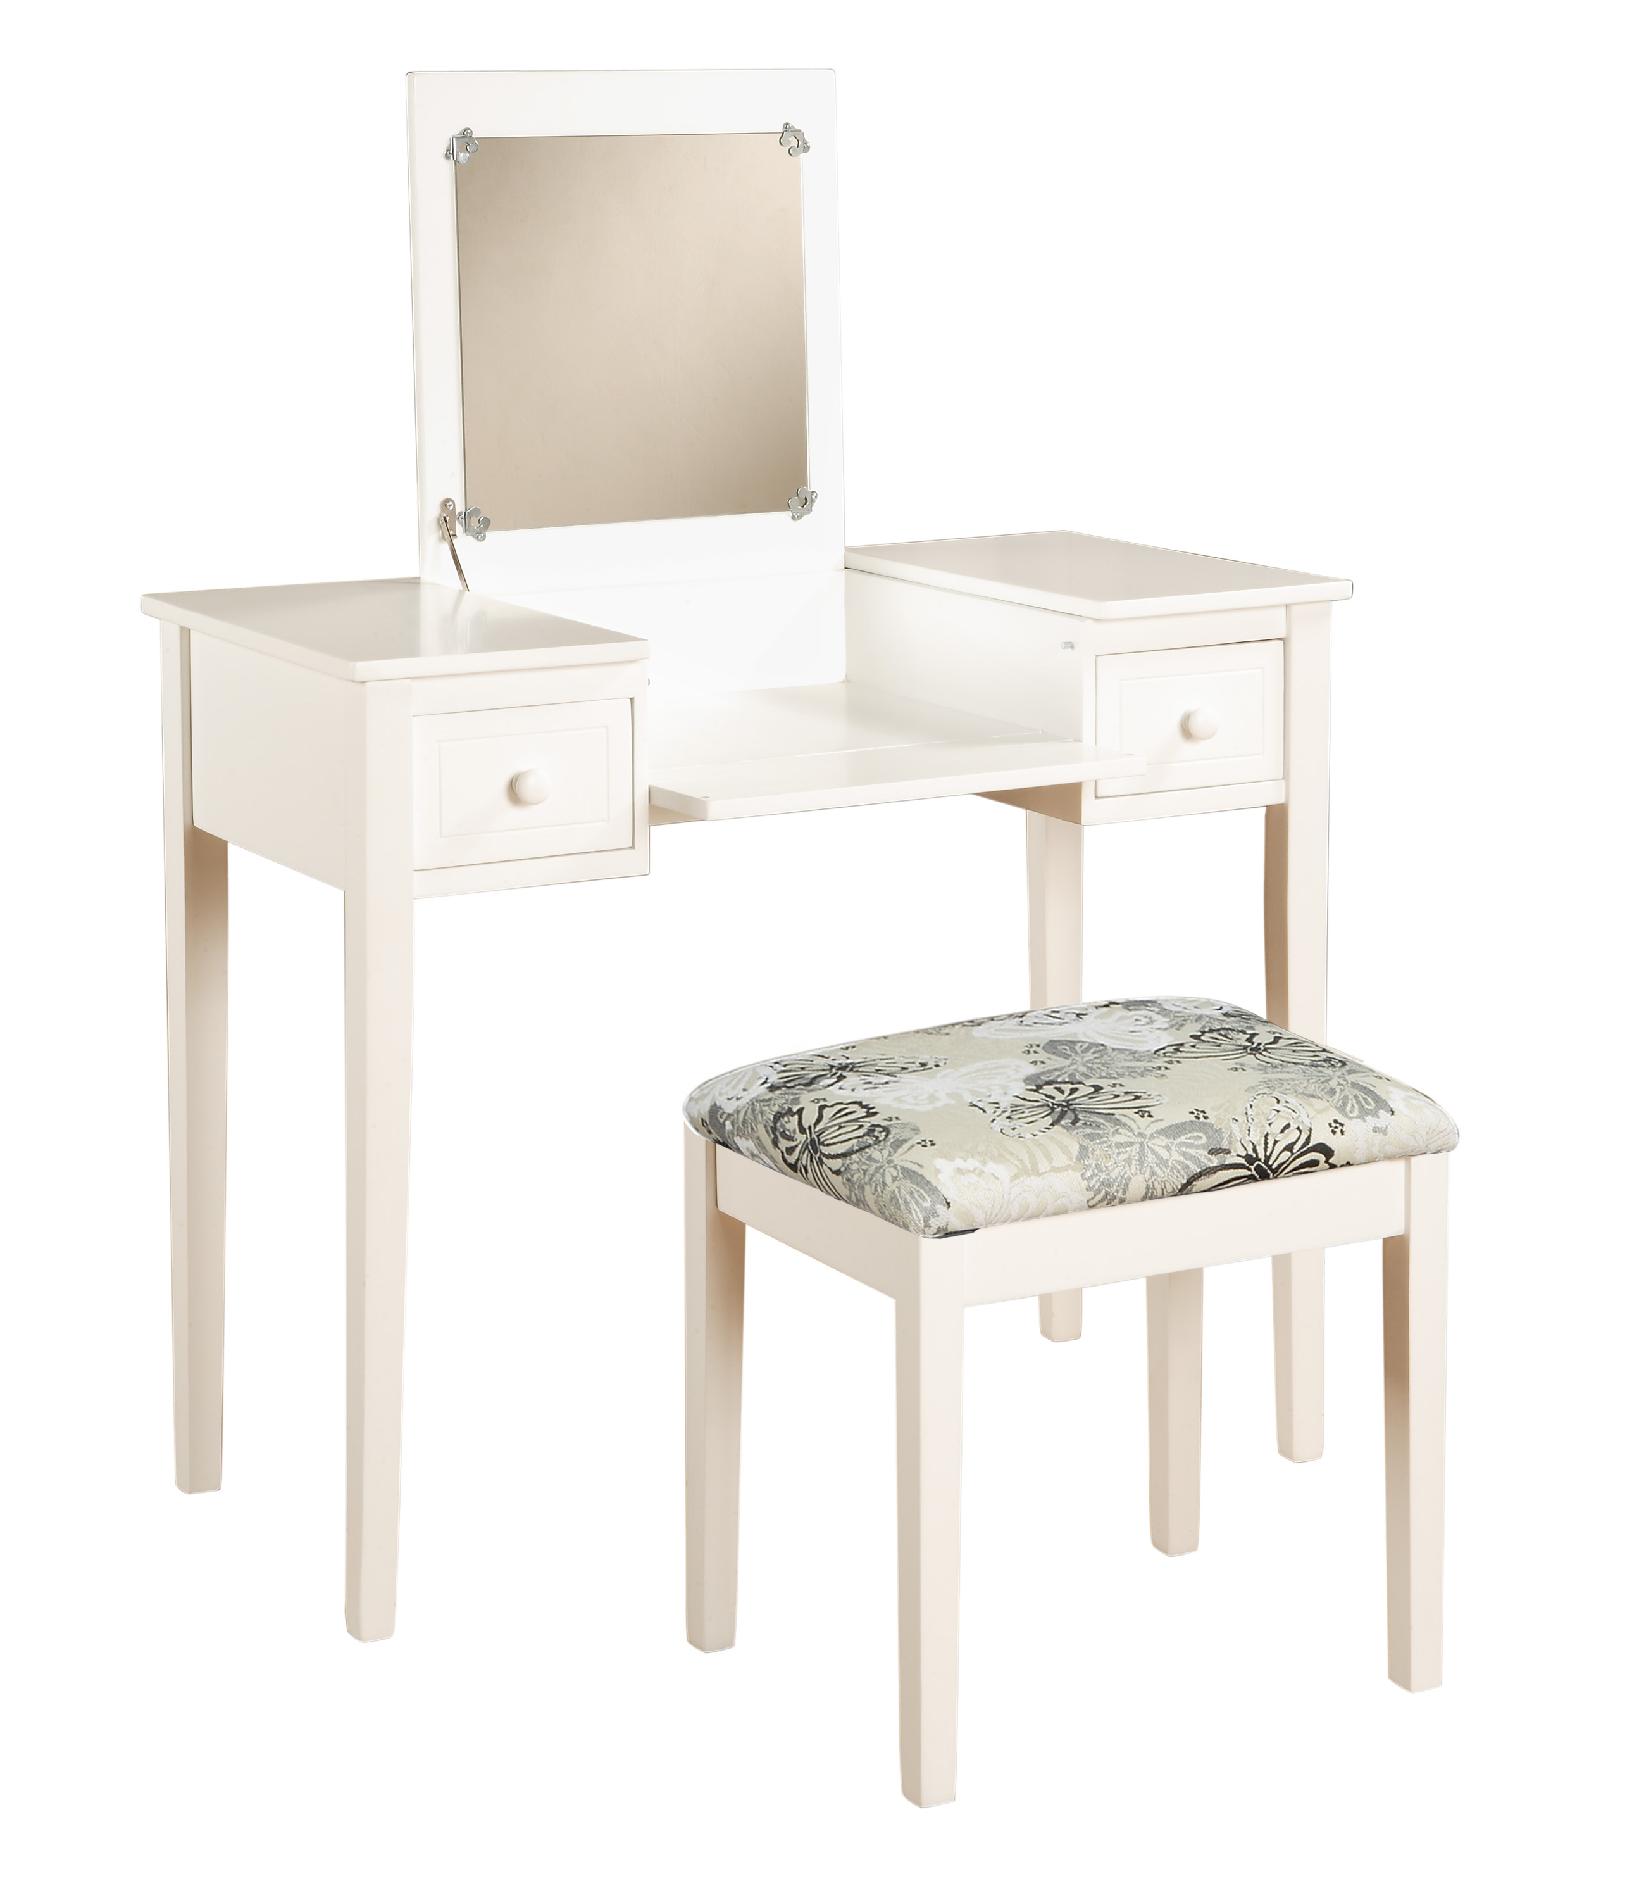 Linon Vanity Set With White Erfly Bench, Vanity And Bench Set